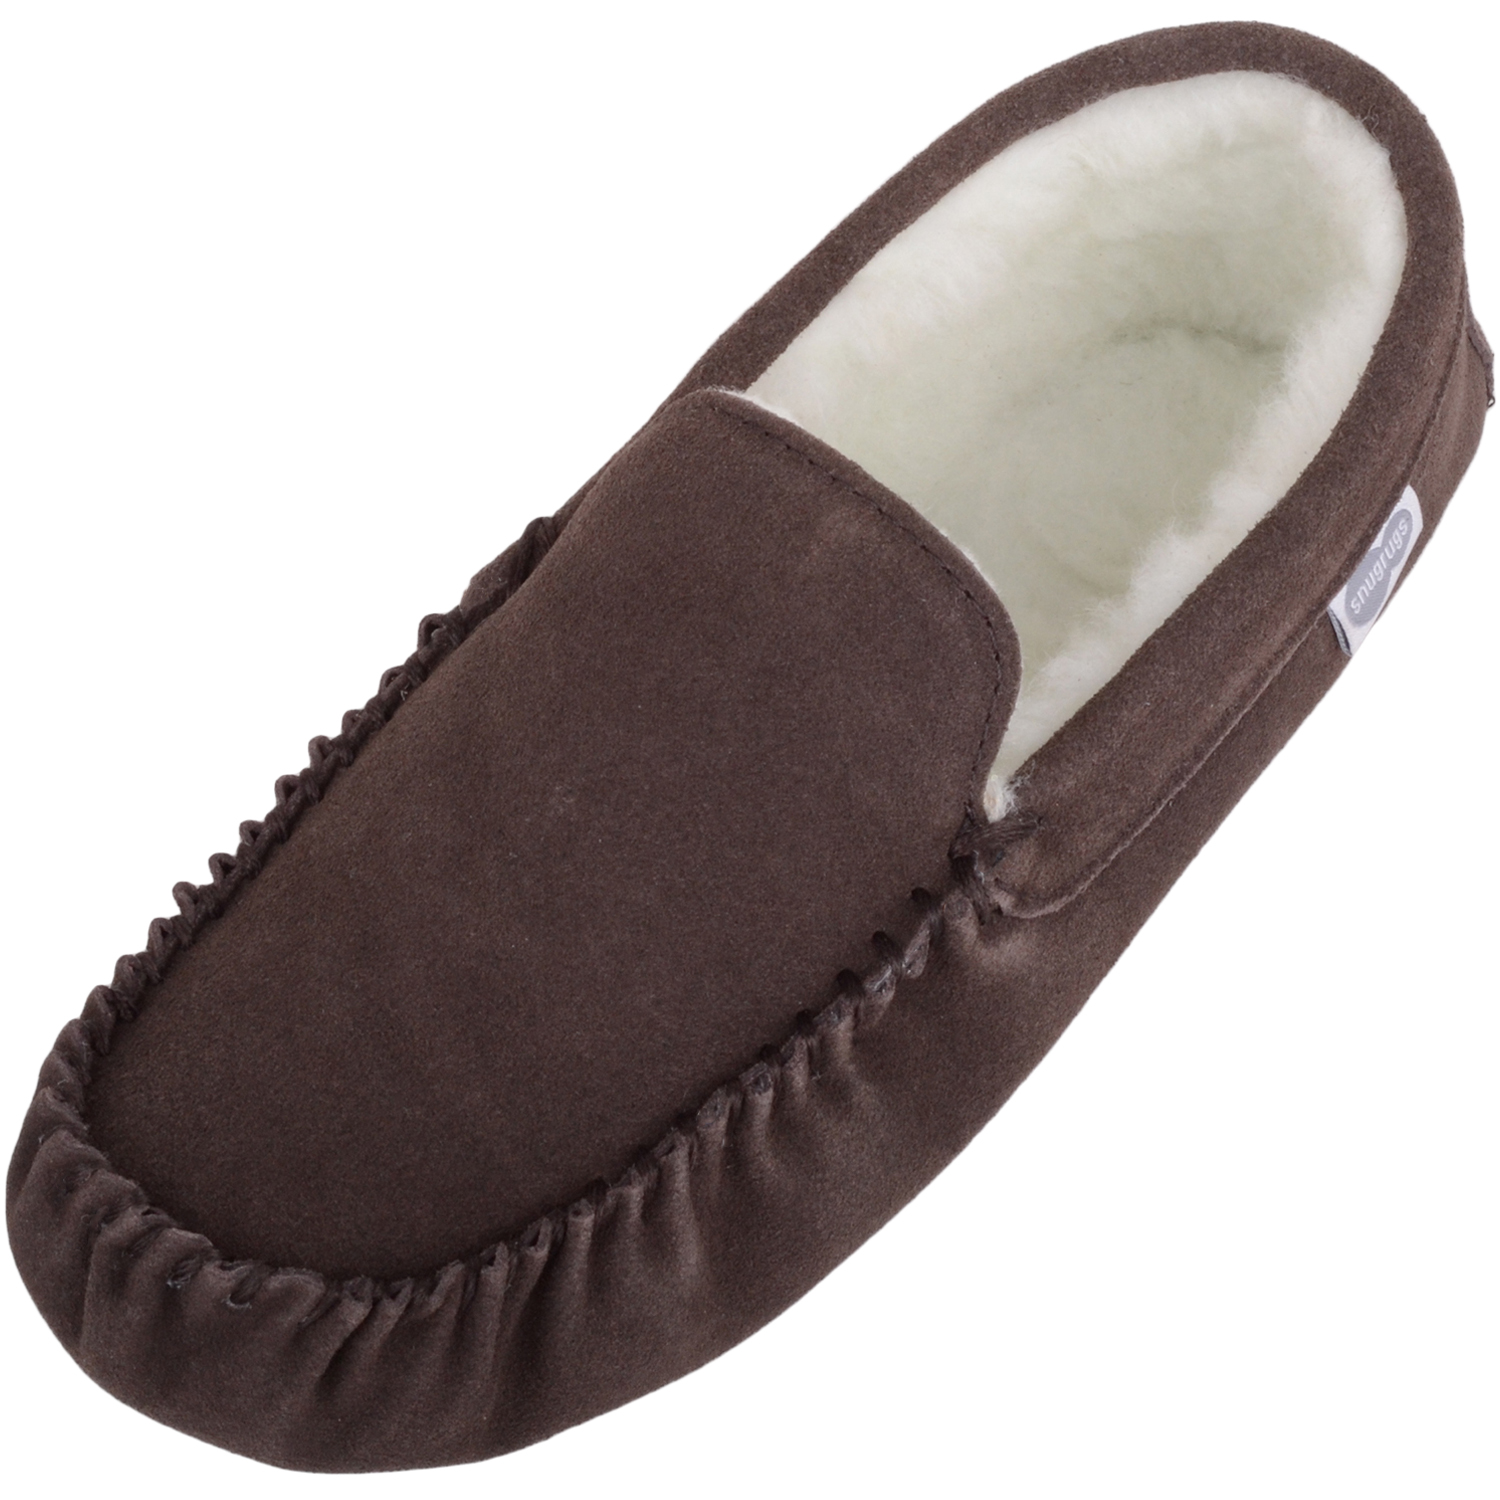 Wool Lined Suede Moccasin with Suede Sole - Dark Brown - Ronnie